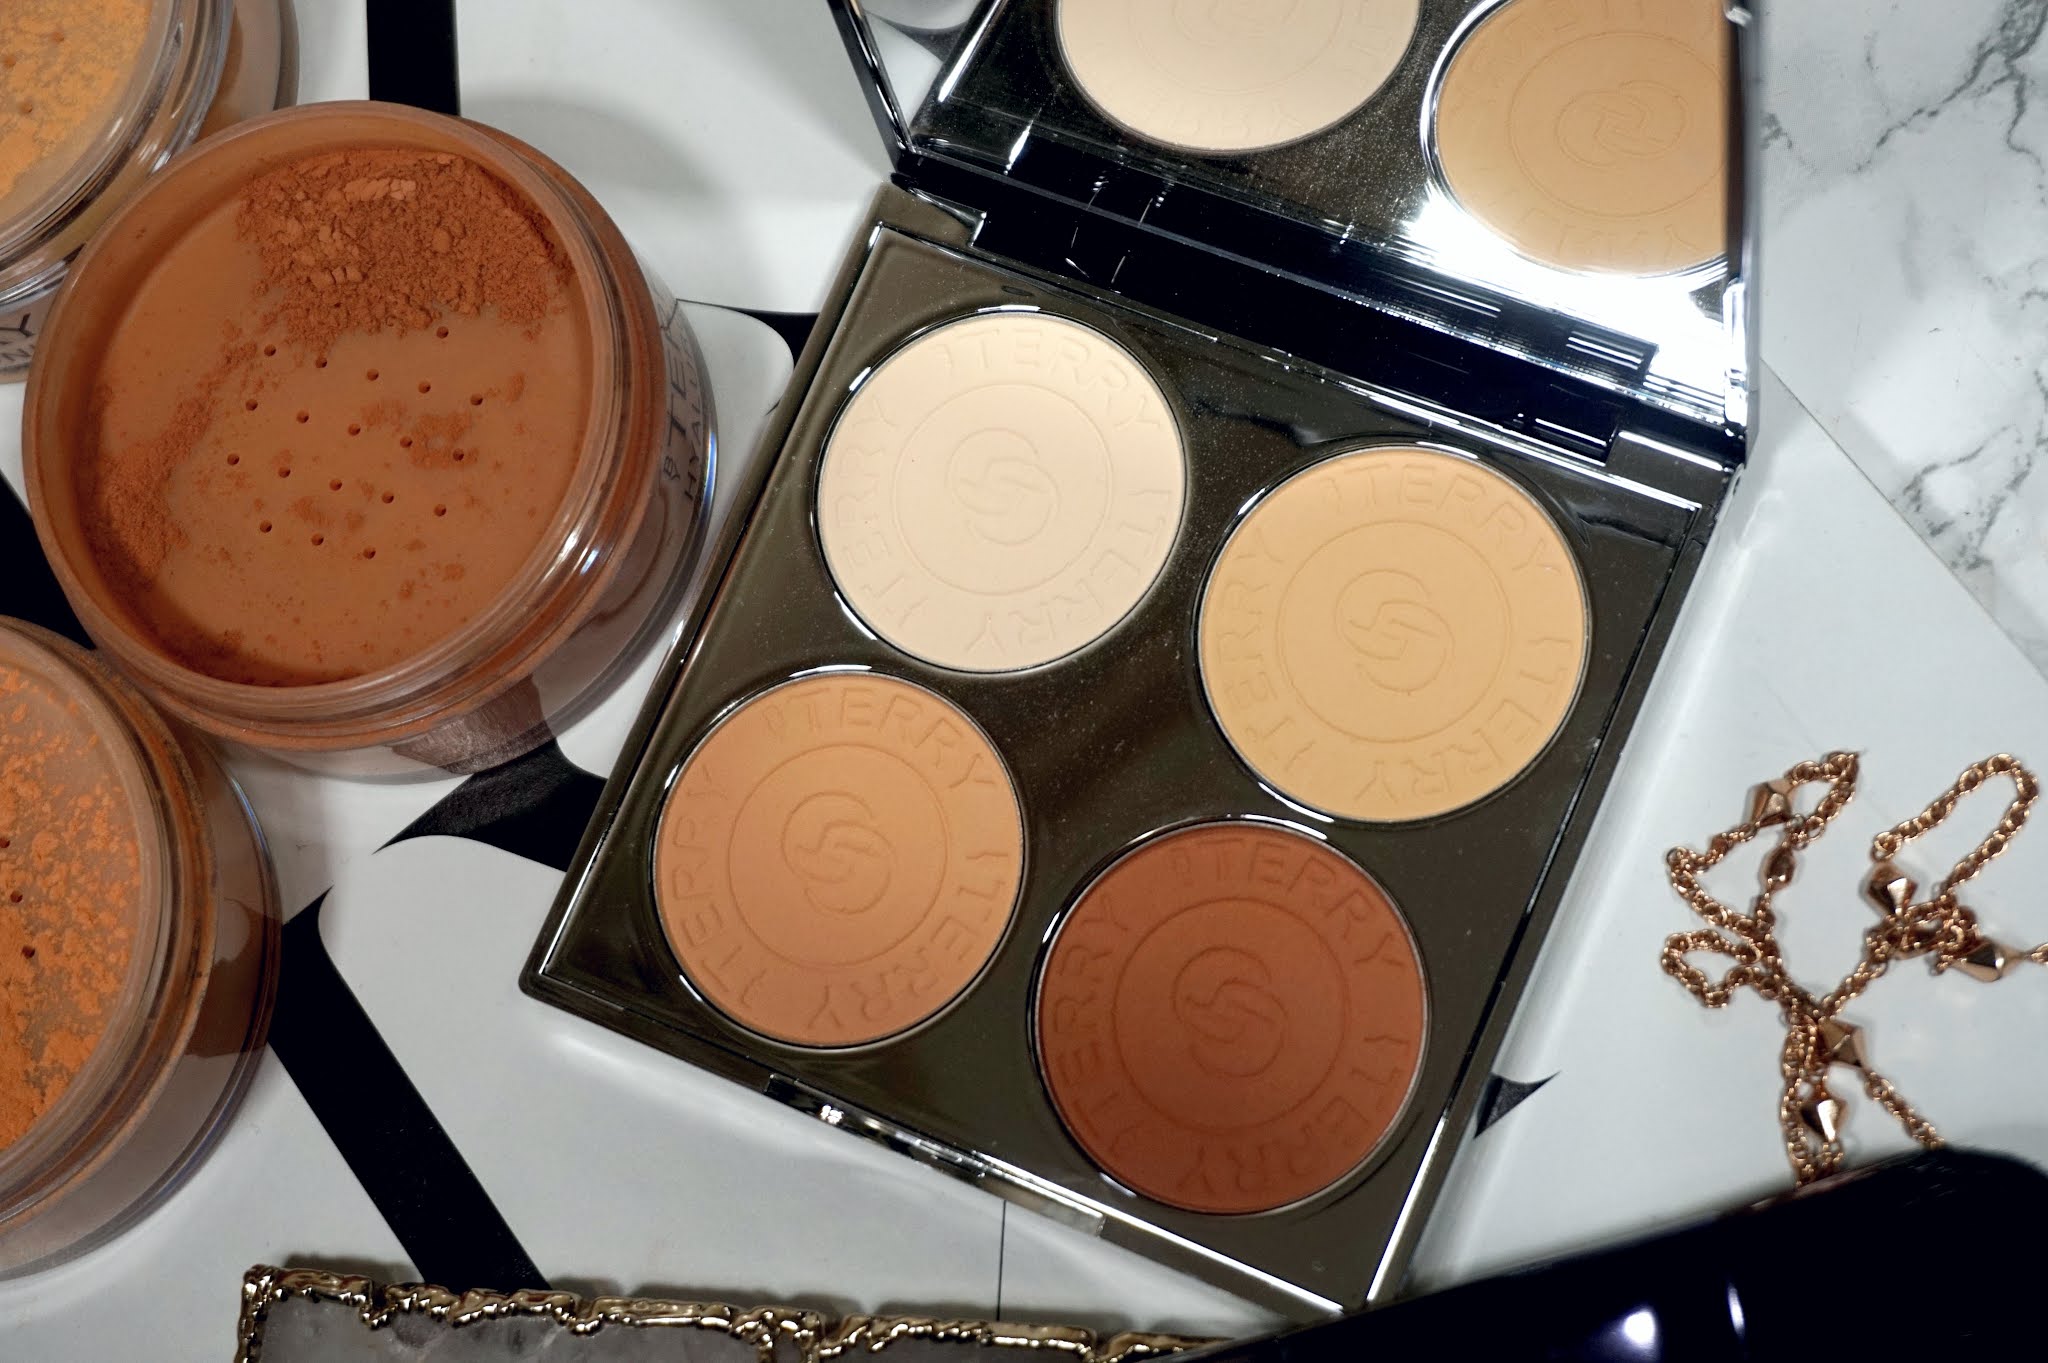 by terry hyaluronic hydra powder palette